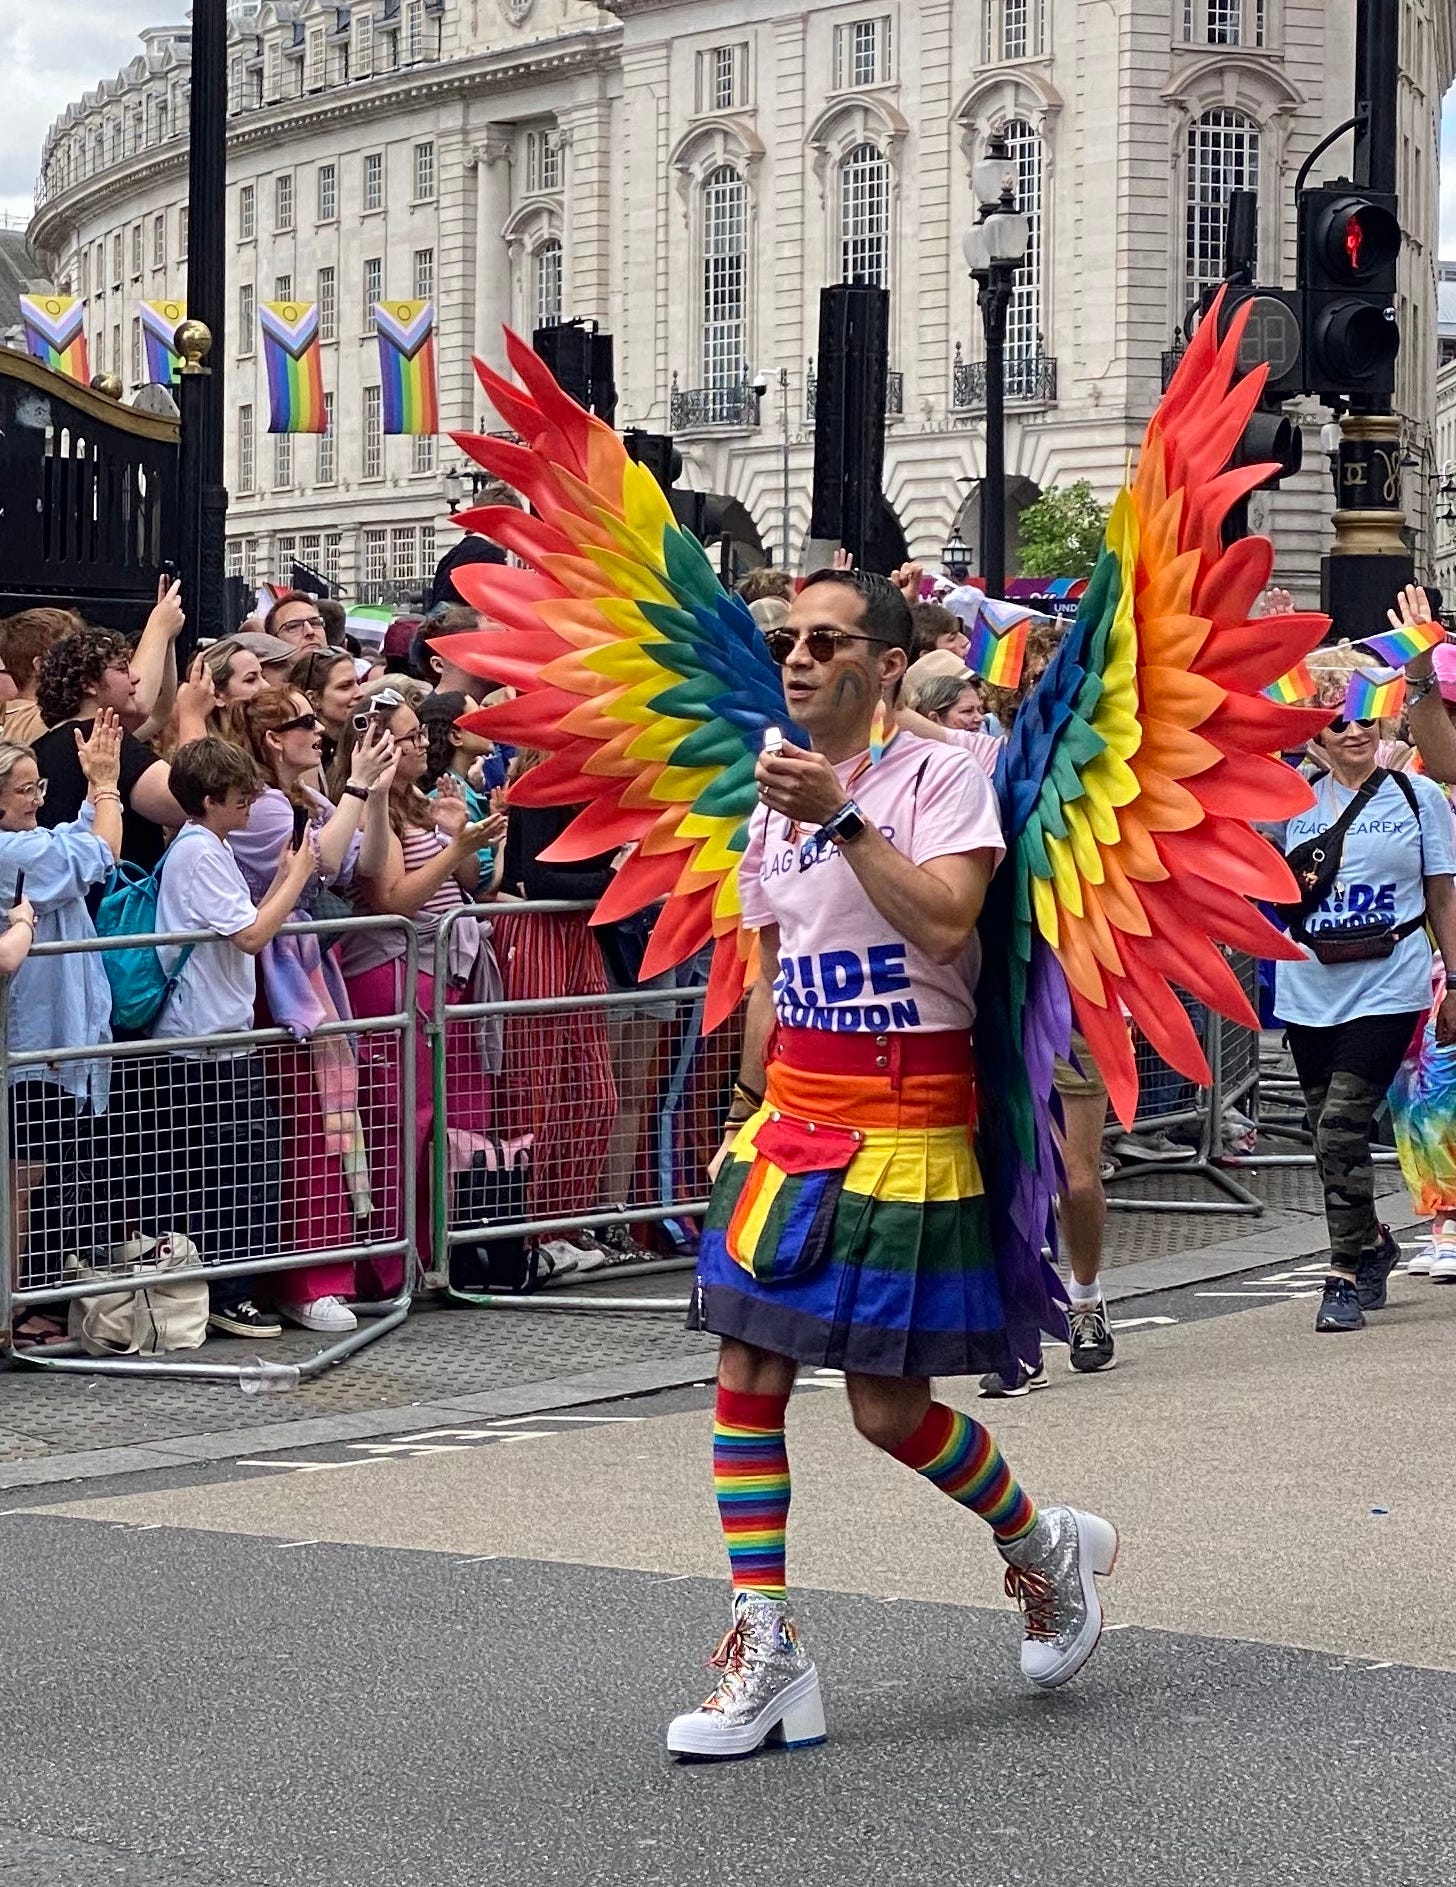 a person in a rainbow skirt and with rainbow wings and rainbow knee-high socks walks down a street near Piccadilly Circus in Sparkly high boots while onlookers standing behind the pedestrian fence look across to the right at other people walking in the parade